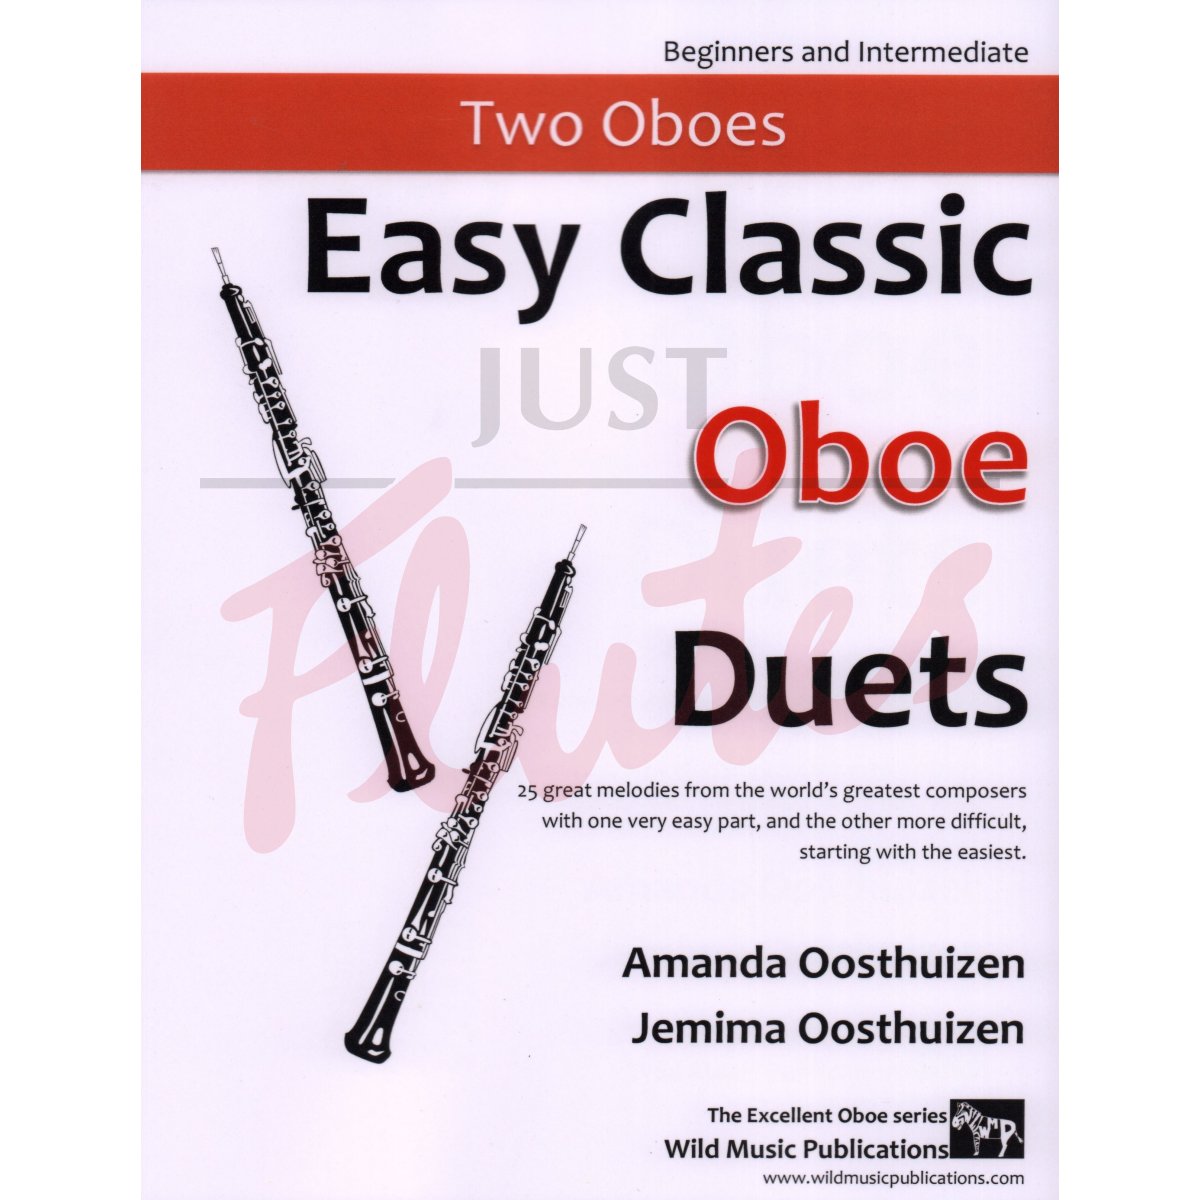 Easy Classic Oboe Duets